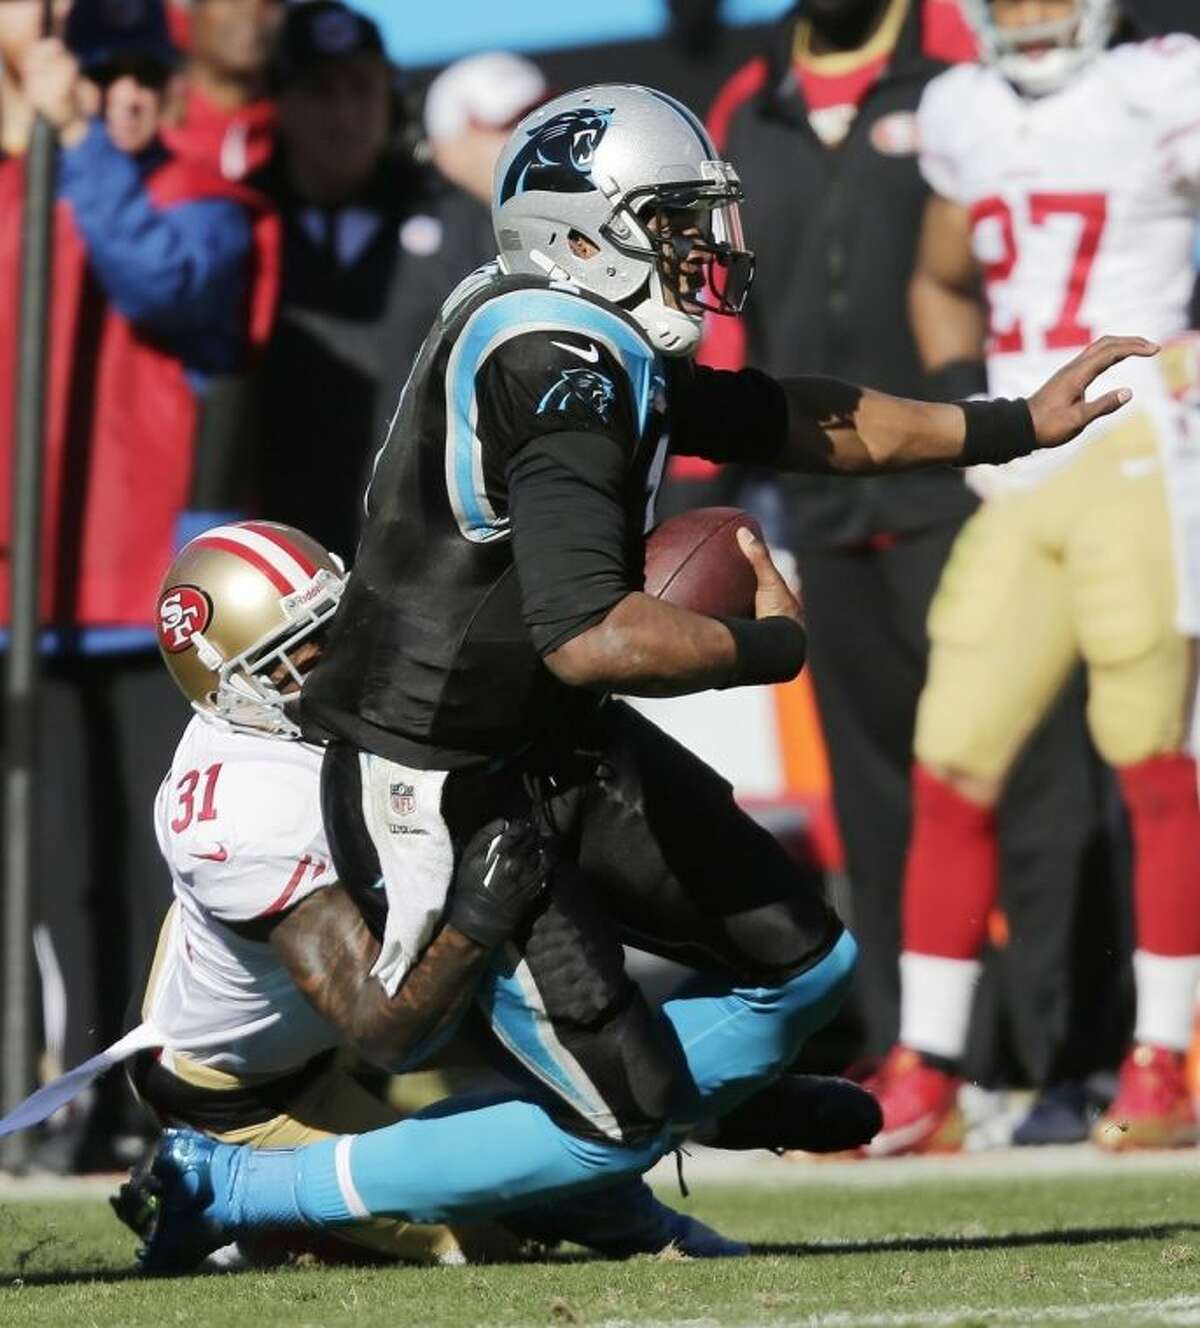 San Francisco 49ers strong safety Donte Whitner (31) tackles Carolina Panthers quarterback Cam Newton (1) during the first half of a divisional playoff NFL football game, Sunday, Jan. 12, 2014, in Charlotte, N.C. (AP Photo/Chuck Burton)